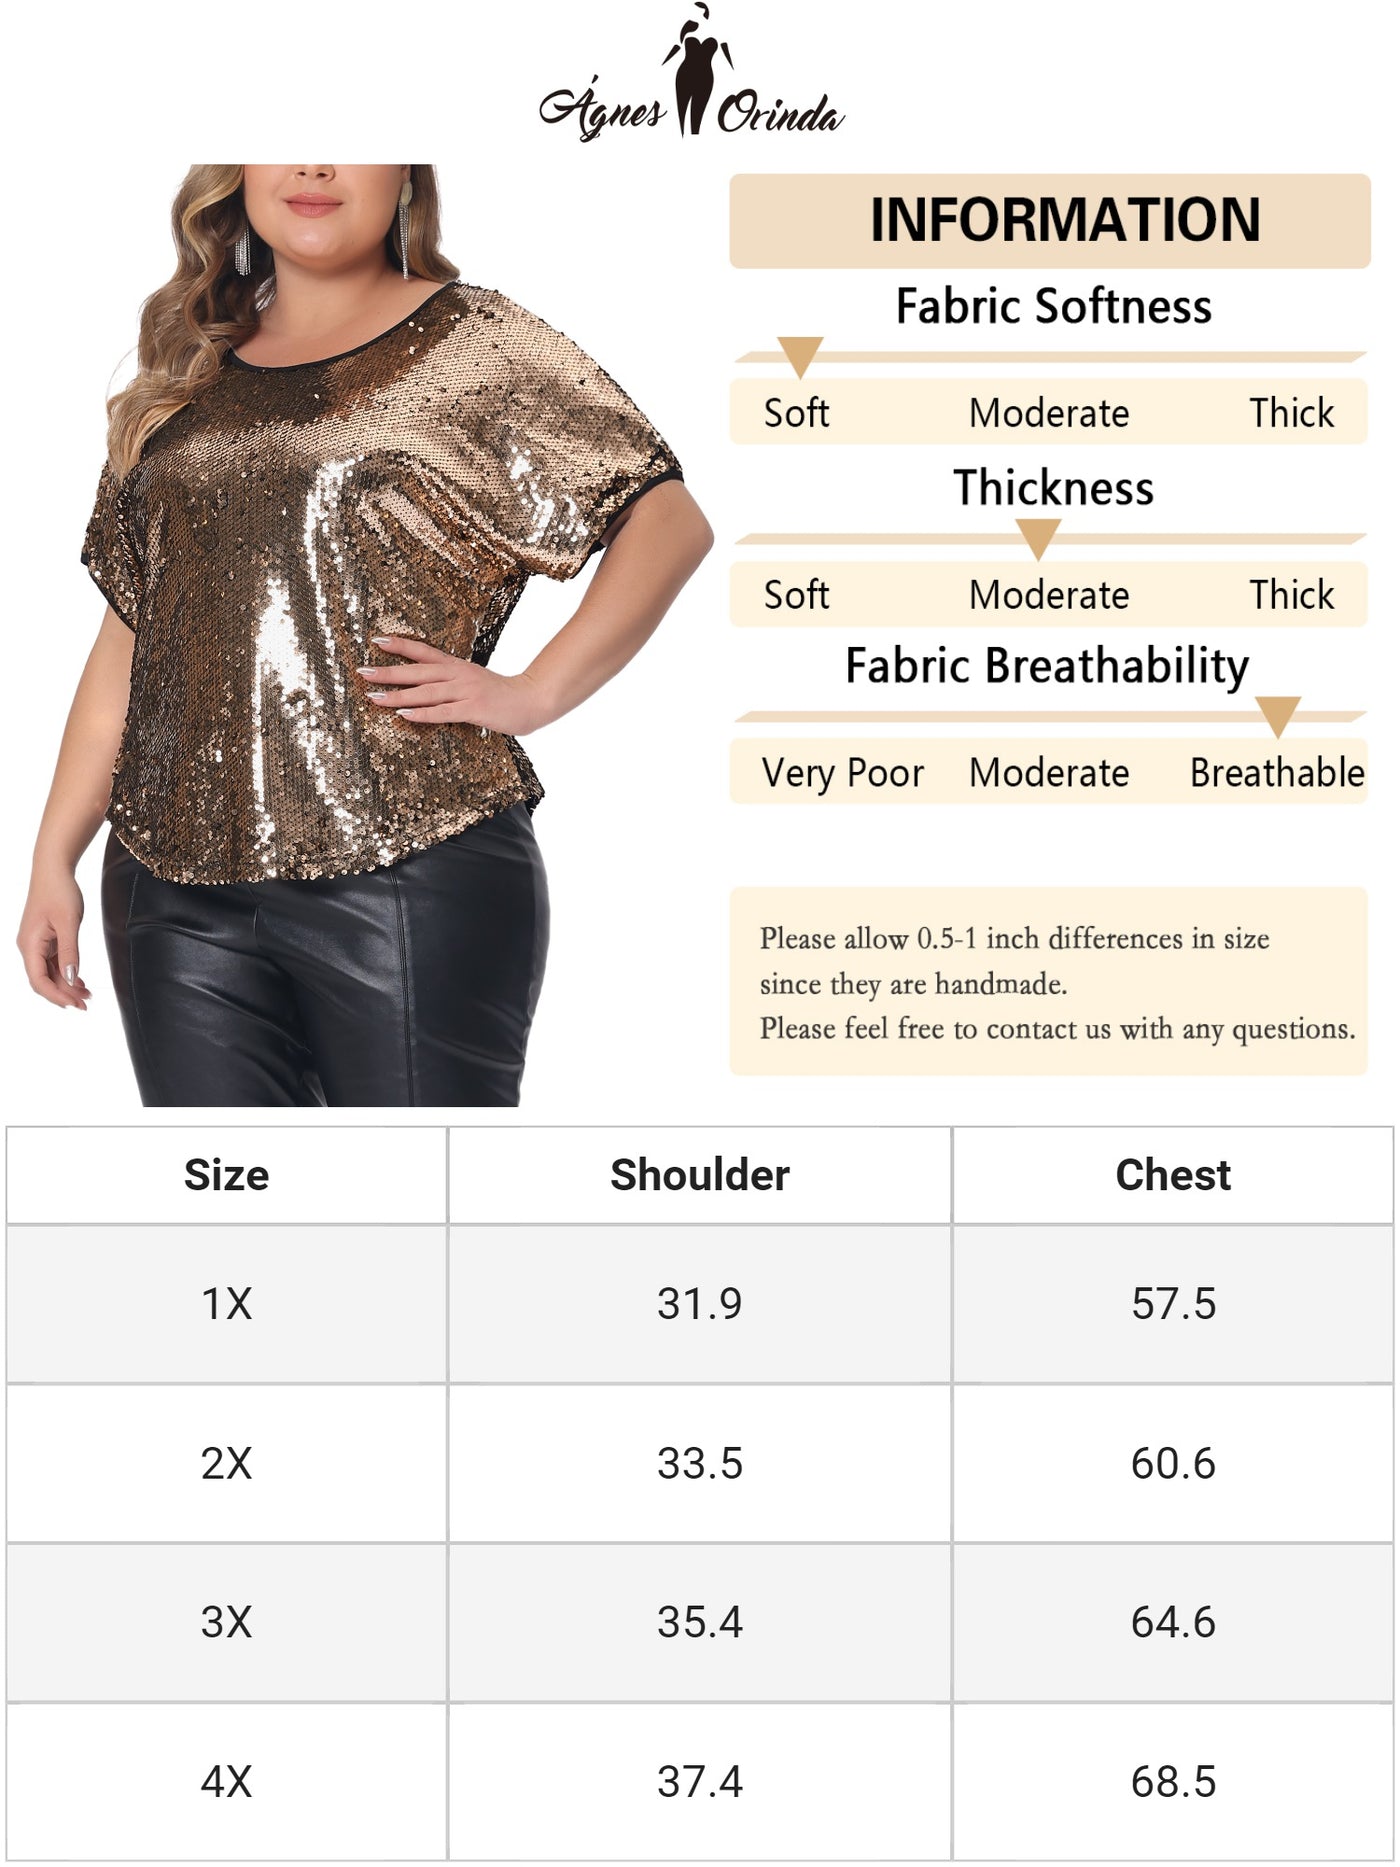 Bublédon Plus Size for Full Sequin Tops Women Glitter Party Shirt Short Sleeve Sparkle Club Night Blouses